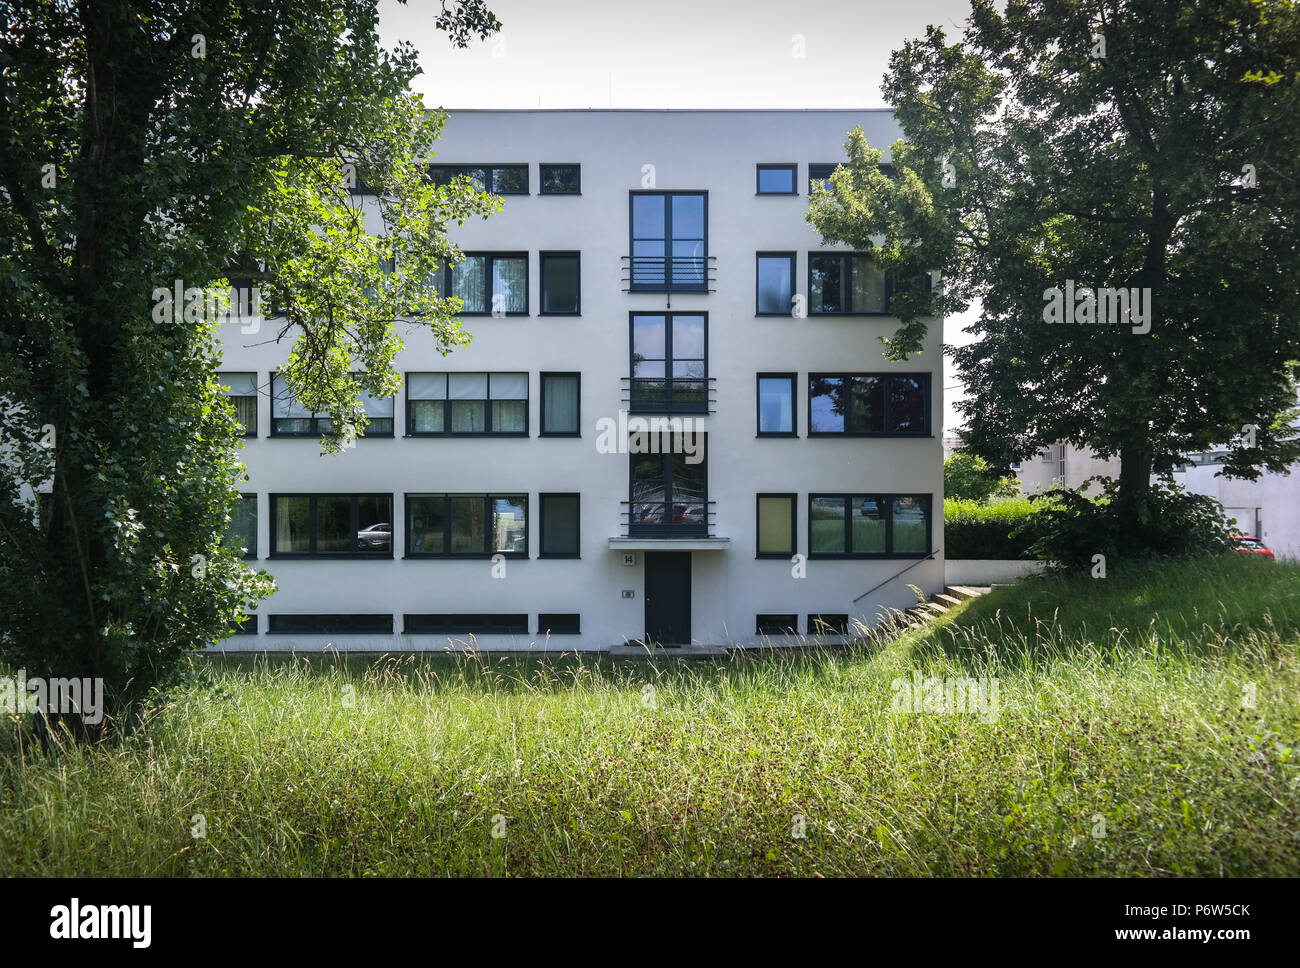 Stuttgart, Weissenhofsiedlung. Garden view of the apartment house built in 1927 by Ludwig Mies van der Rohe. Stock Photo